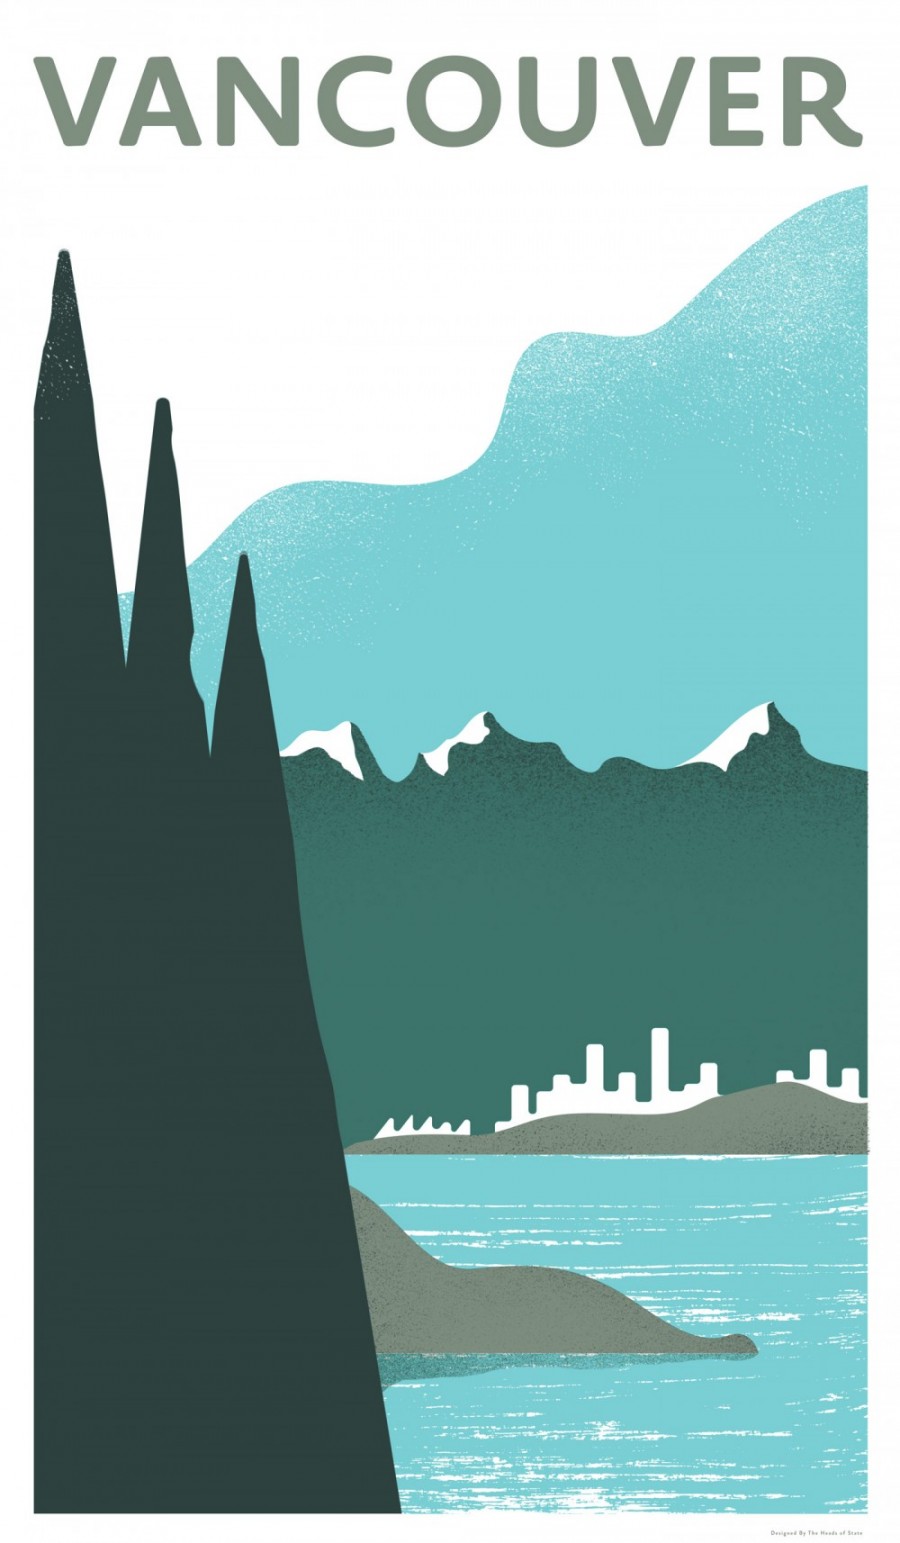 Vancouver, British Columbia, Canada - Travel Poster Series - The Heads of State